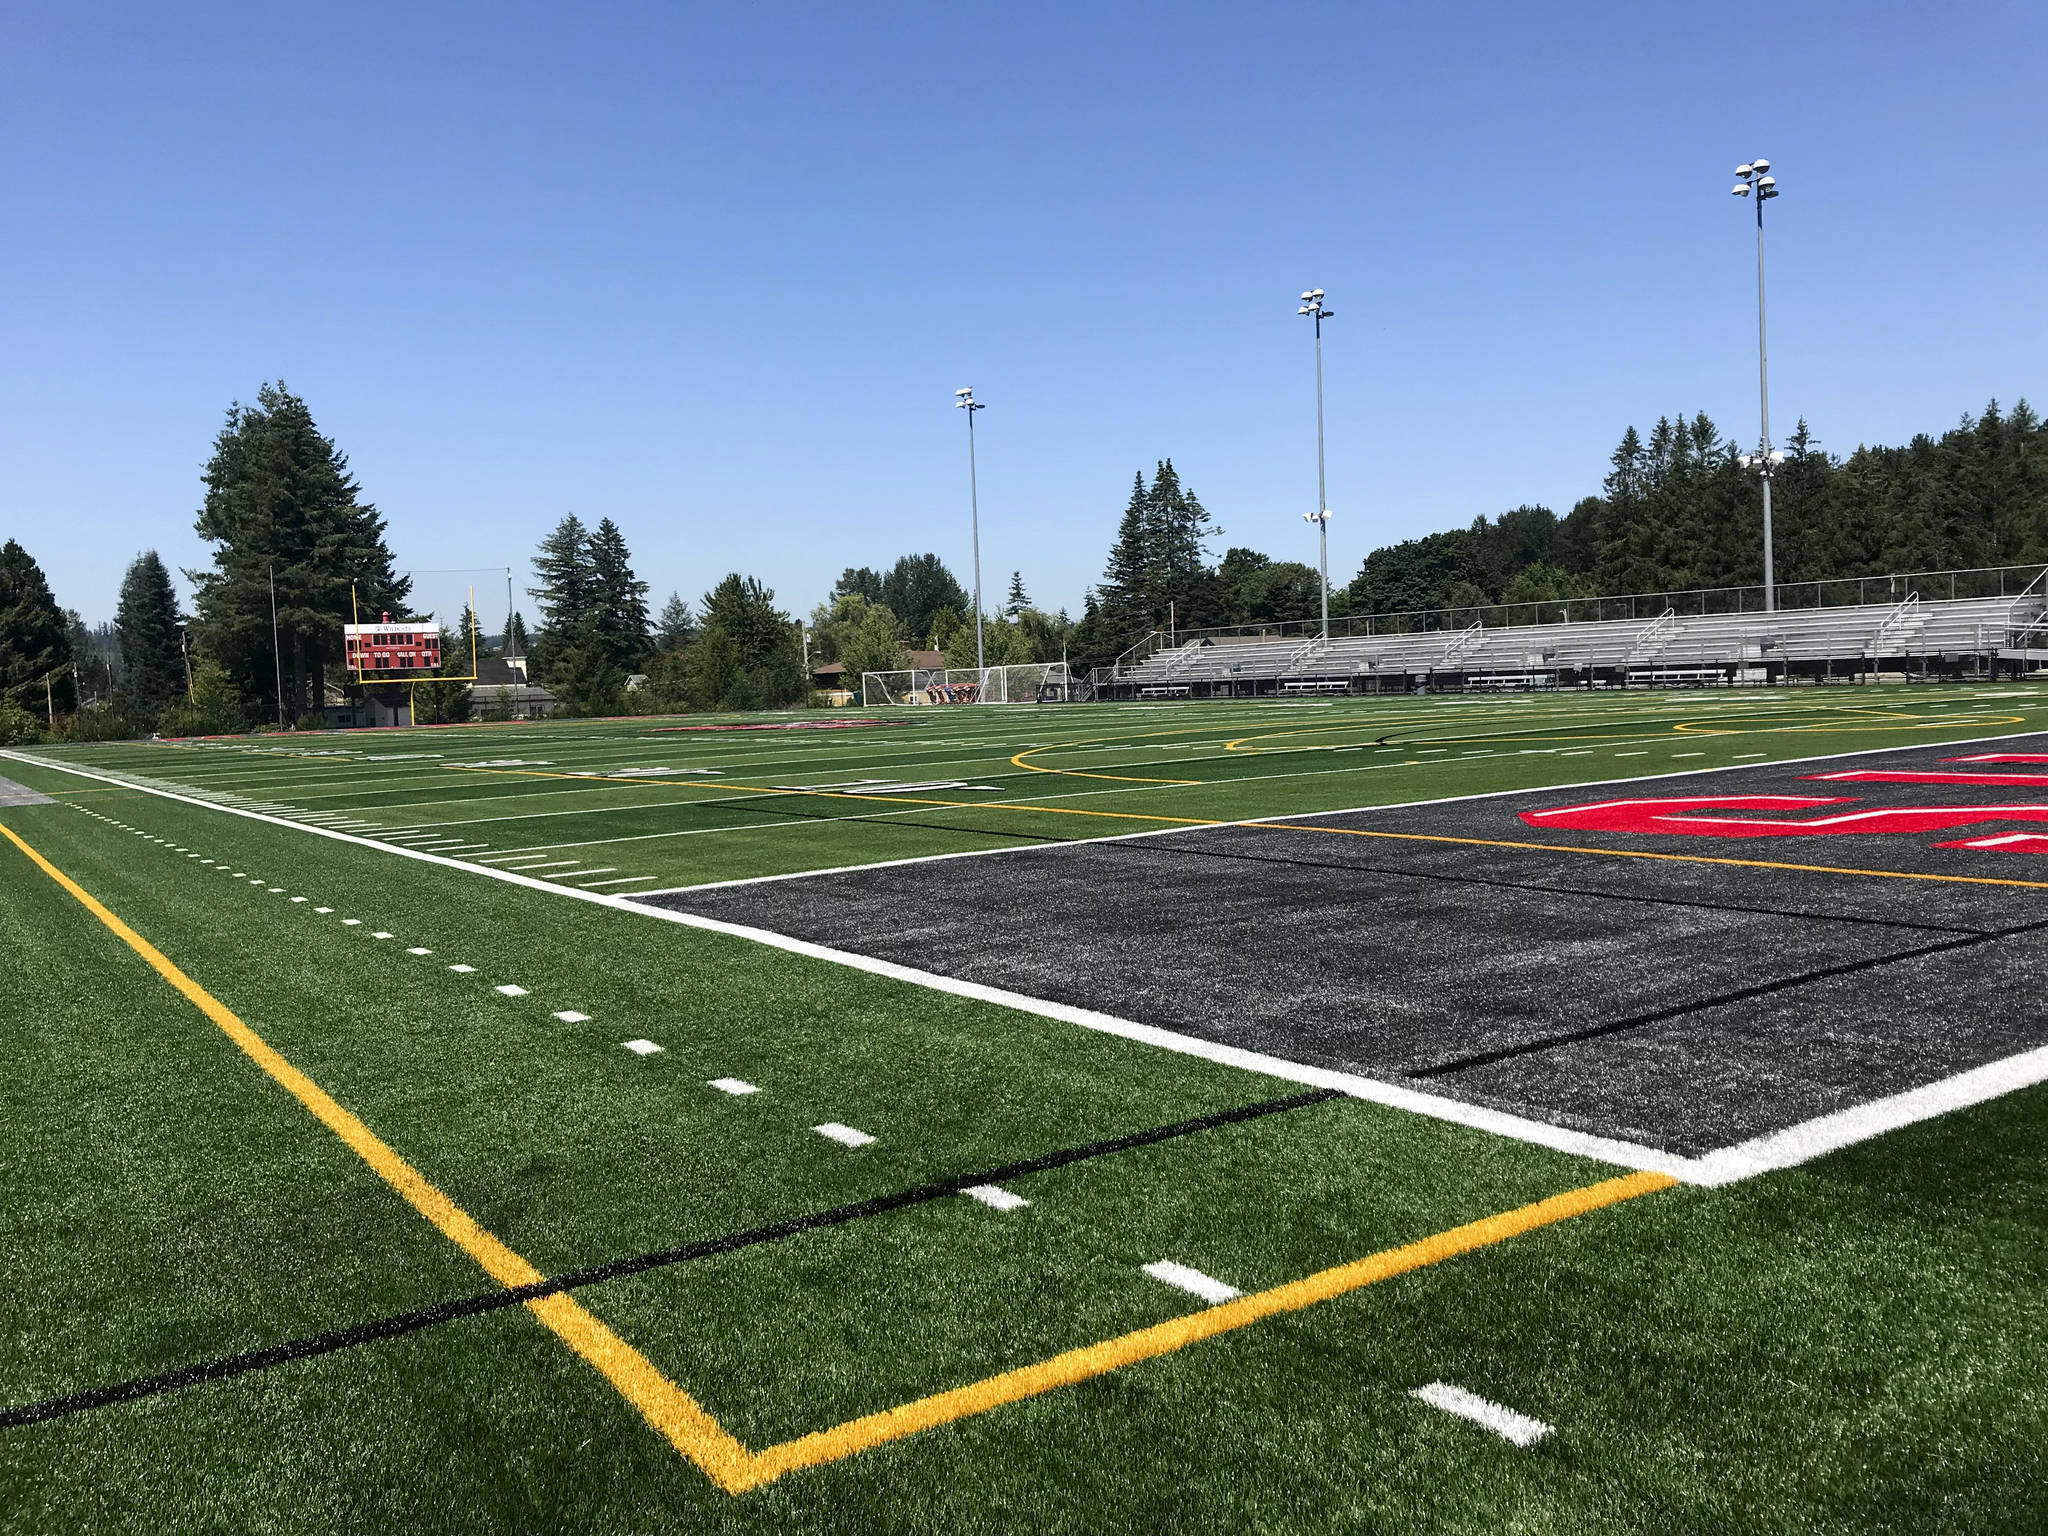 The Mount Si High School stadium field received a makeover this summer. New synthetic artificial turf was installed in mid-July. It was the first time the playing surface at Mount Si High School had been replaced since 2005. Shaun Scott, staff photo